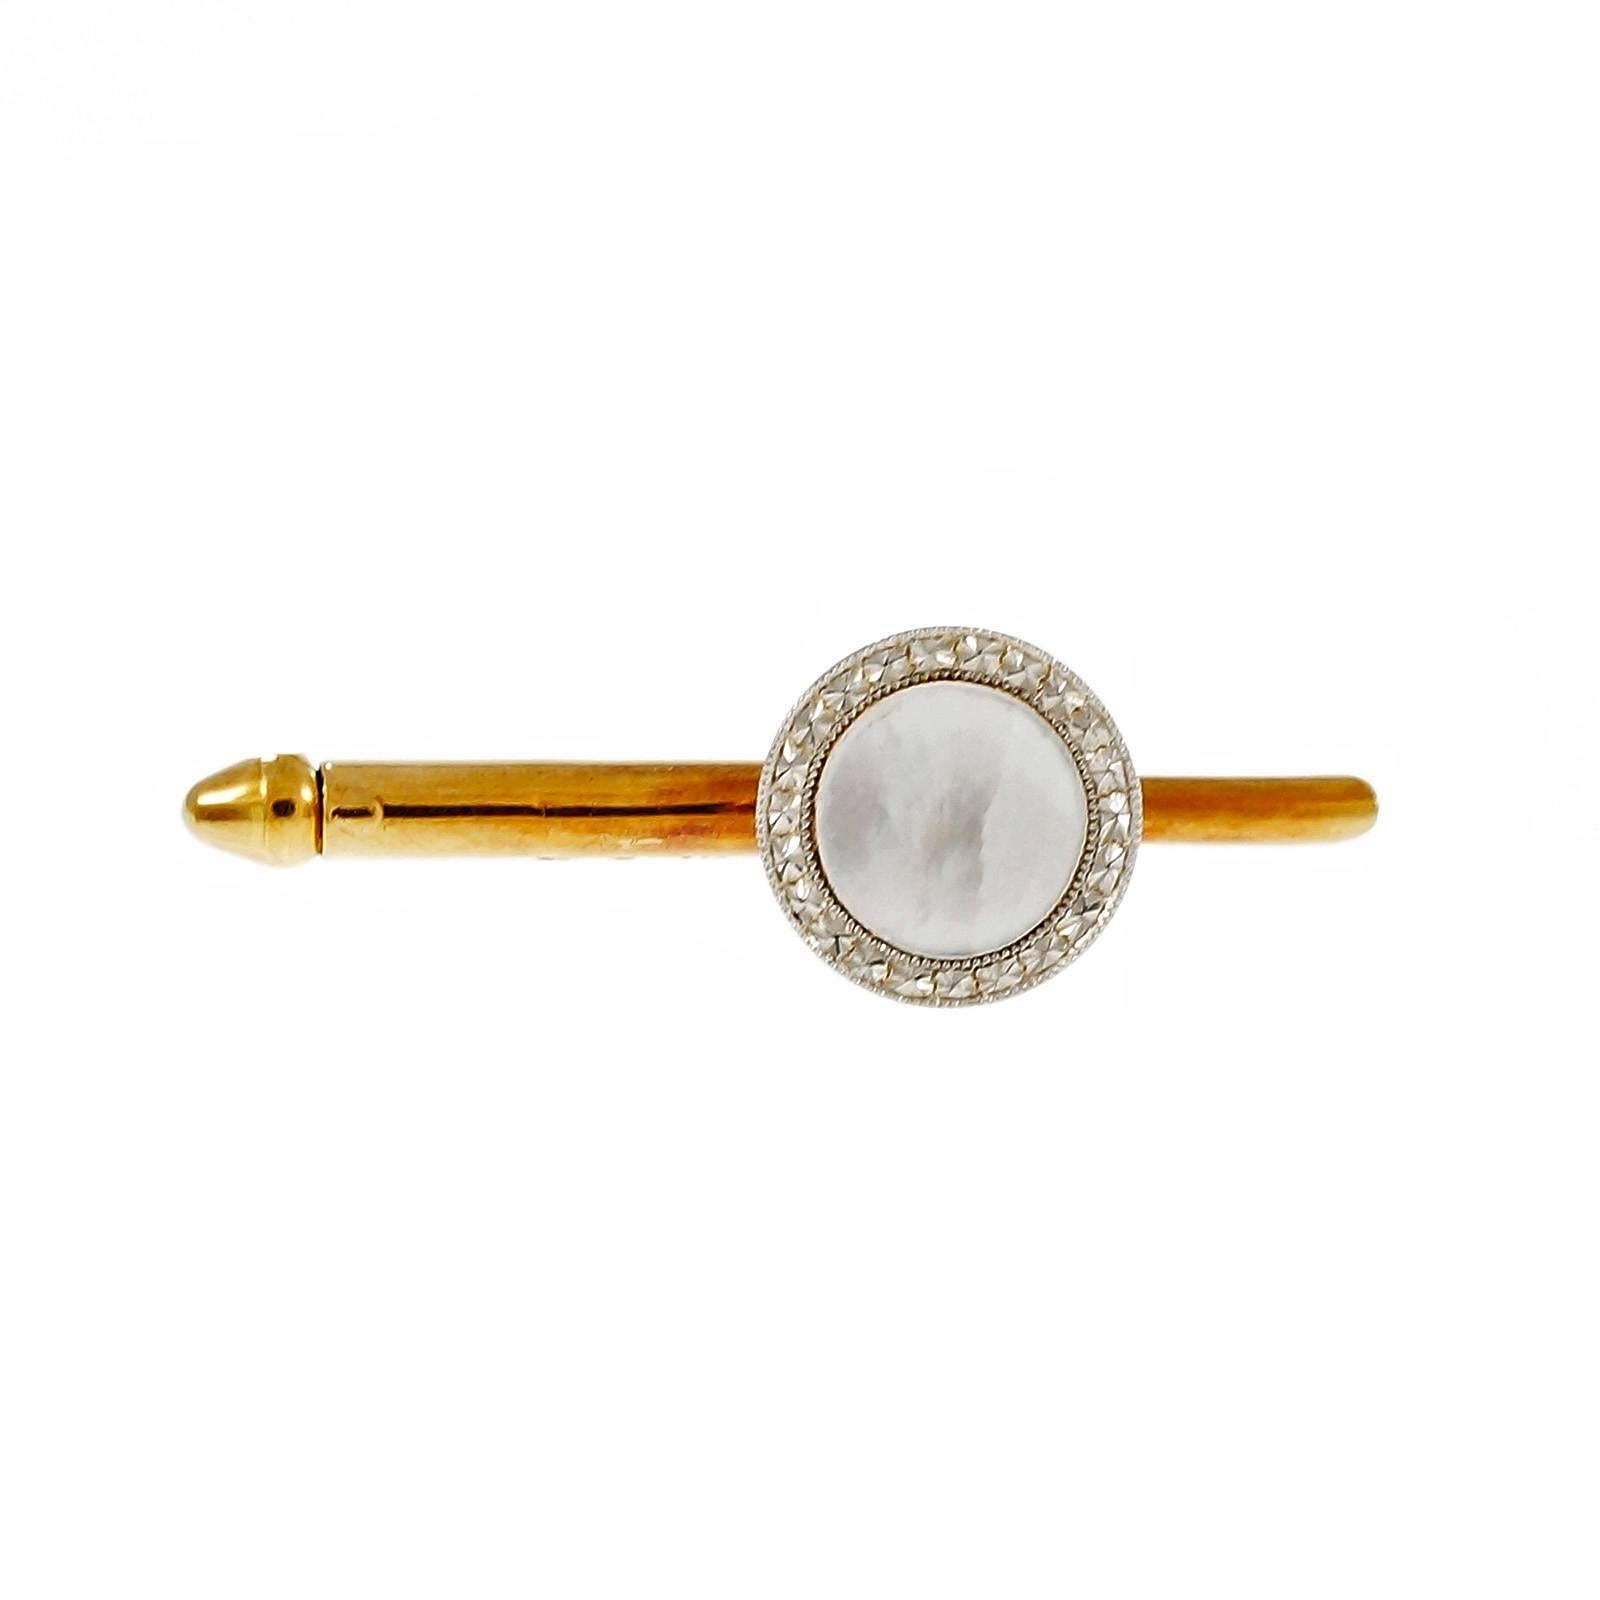 1900-1909 men’s dress set 2 double sided cuff links, four vest or waist coat studs, 3 shirt studs, Platinum rims and white Mother of Pearl centers. 

14k gold with natural patina.
14k yellow gold and Platinum
4 white Mother of Pearl, 10.86mm
4